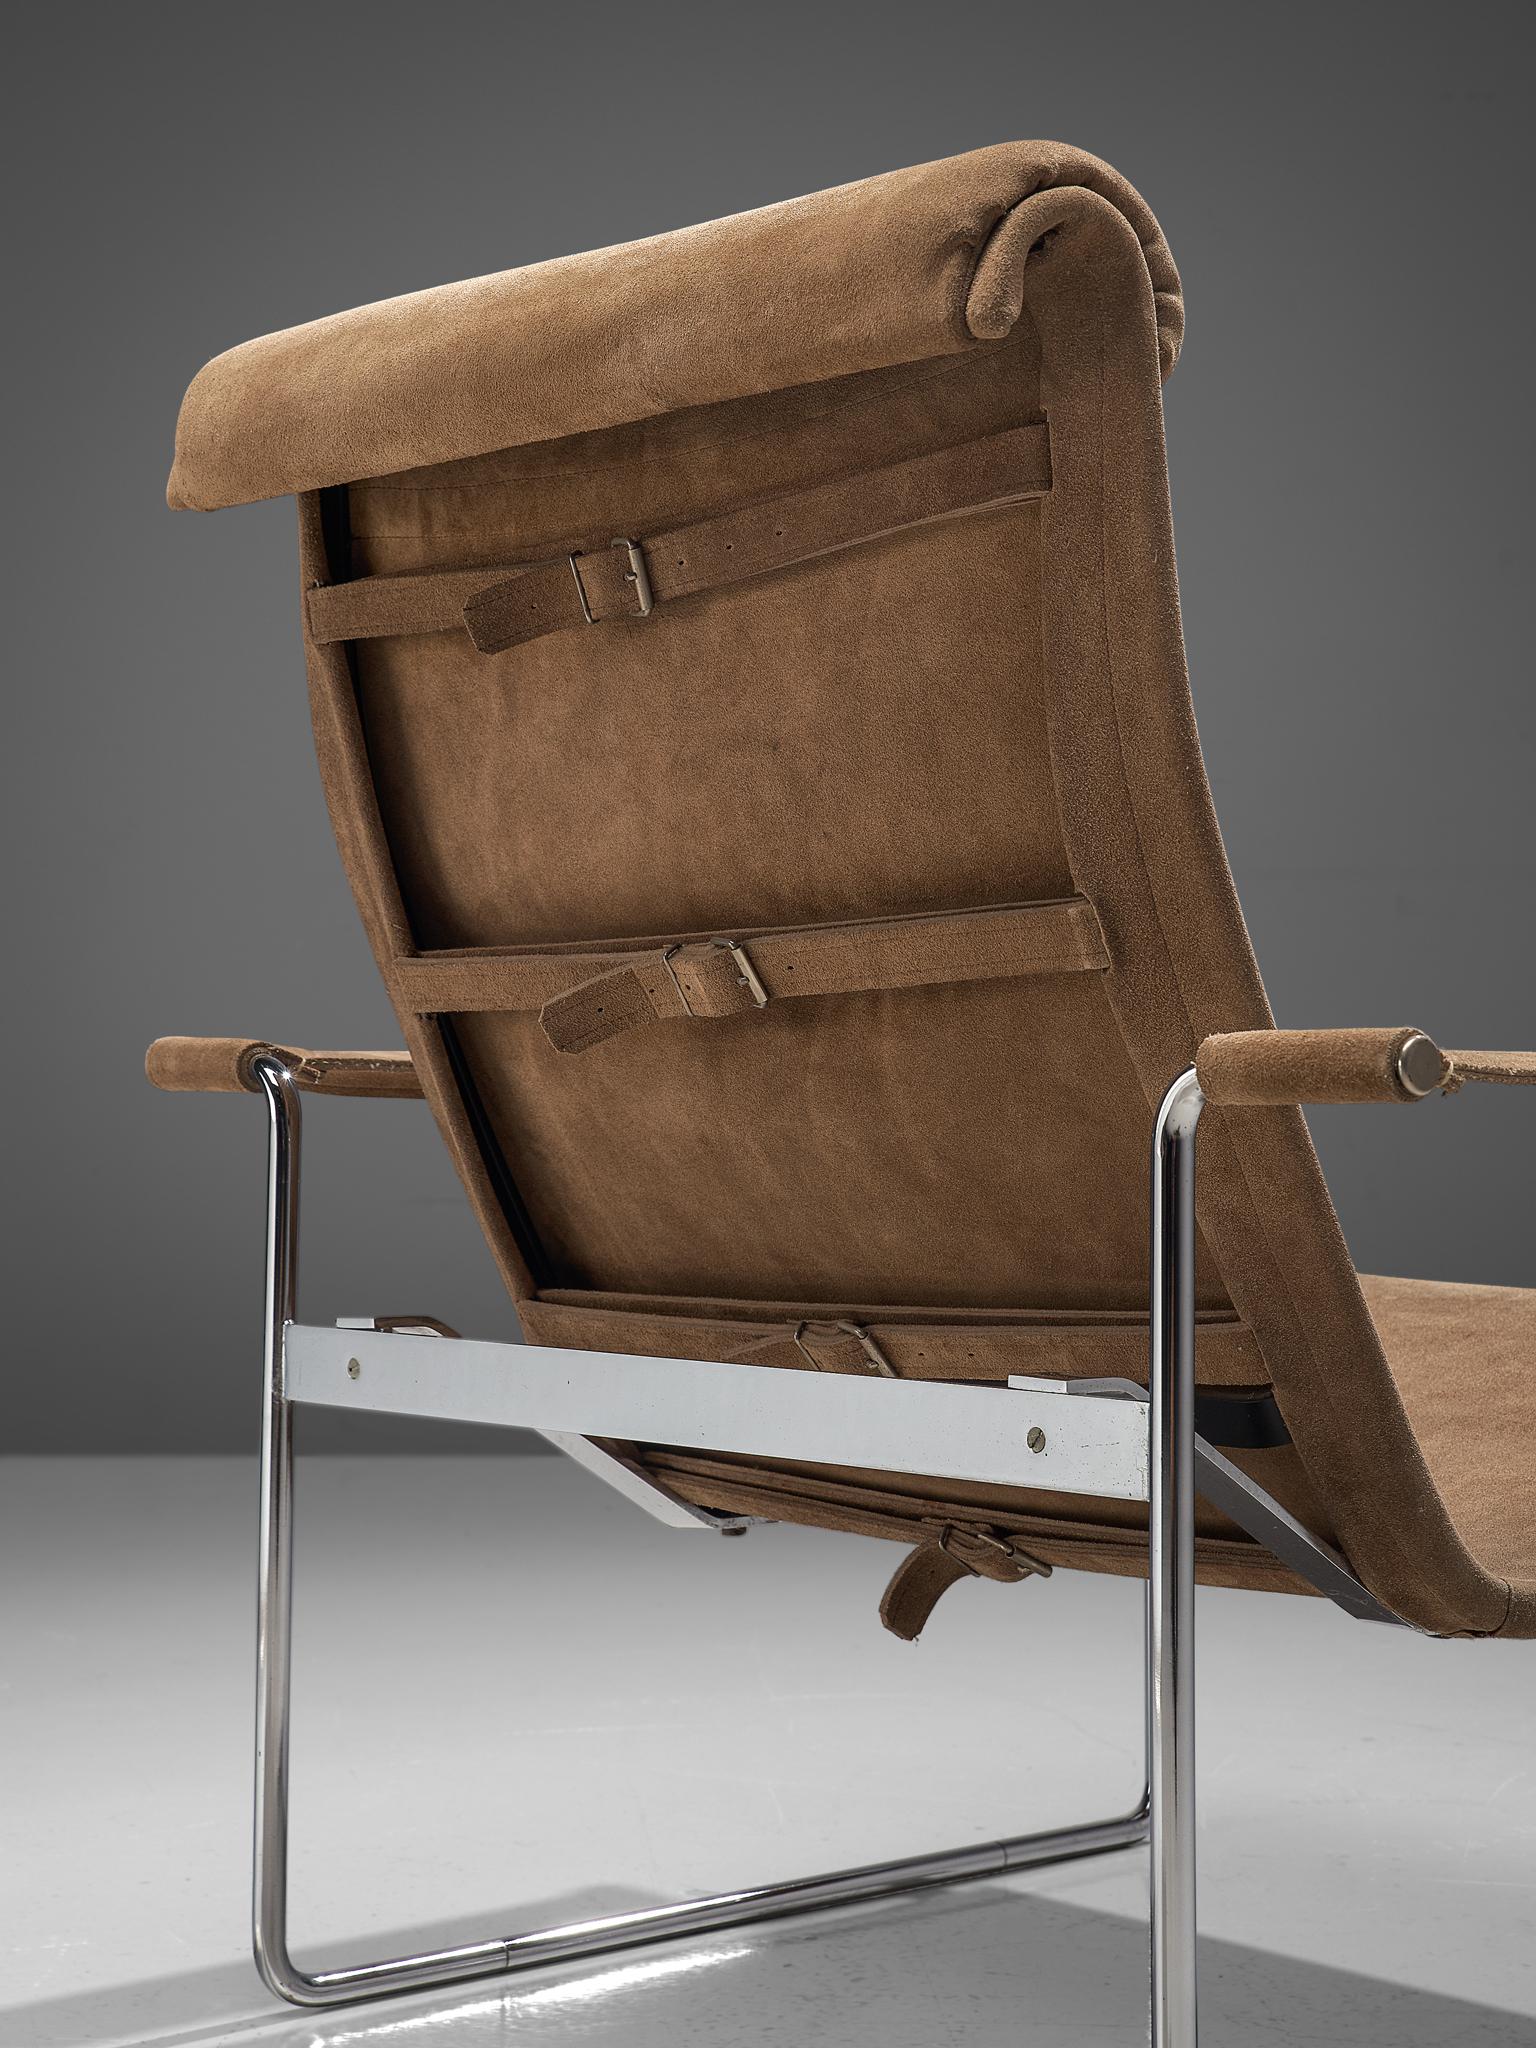 Mid-20th Century Hans Könecke Lounge Chair in Beige Suede, Tecta, Germany, 1960s